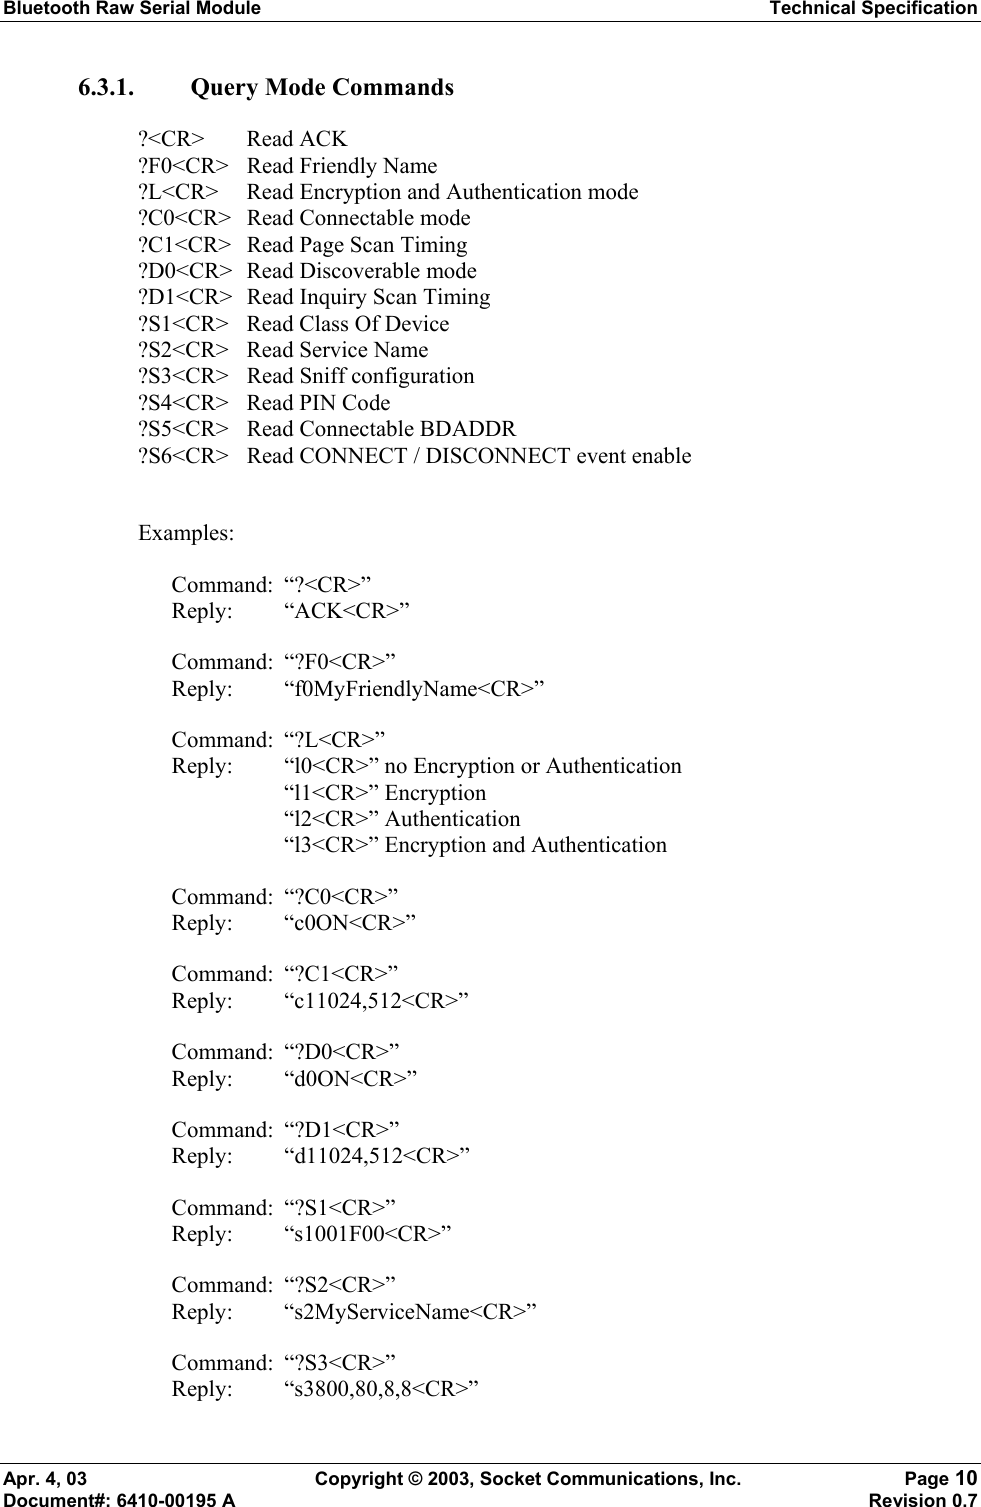 Bluetooth Raw Serial Module Technical Specification Apr. 4, 03  Copyright © 2003, Socket Communications, Inc.  Page 10 Document#: 6410-00195 A    Revision 0.7 6.3.1. Query Mode Commands ?&lt;CR&gt; Read ACK ?F0&lt;CR&gt;  Read Friendly Name ?L&lt;CR&gt;  Read Encryption and Authentication mode ?C0&lt;CR&gt; Read Connectable mode ?C1&lt;CR&gt;  Read Page Scan Timing ?D0&lt;CR&gt; Read Discoverable mode ?D1&lt;CR&gt;  Read Inquiry Scan Timing ?S1&lt;CR&gt;  Read Class Of Device ?S2&lt;CR&gt; Read Service Name ?S3&lt;CR&gt;  Read Sniff configuration ?S4&lt;CR&gt;  Read PIN Code ?S5&lt;CR&gt;  Read Connectable BDADDR ?S6&lt;CR&gt;  Read CONNECT / DISCONNECT event enable  Examples:  Command: “?&lt;CR&gt;” Reply: “ACK&lt;CR&gt;” Command: “?F0&lt;CR&gt;” Reply: “f0MyFriendlyName&lt;CR&gt;” Command: “?L&lt;CR&gt;” Reply:  “l0&lt;CR&gt;” no Encryption or Authentication   “l1&lt;CR&gt;” Encryption   “l2&lt;CR&gt;” Authentication   “l3&lt;CR&gt;” Encryption and Authentication Command: “?C0&lt;CR&gt;” Reply: “c0ON&lt;CR&gt;” Command: “?C1&lt;CR&gt;” Reply: “c11024,512&lt;CR&gt;” Command: “?D0&lt;CR&gt;” Reply: “d0ON&lt;CR&gt;” Command: “?D1&lt;CR&gt;” Reply: “d11024,512&lt;CR&gt;” Command: “?S1&lt;CR&gt;” Reply: “s1001F00&lt;CR&gt;” Command: “?S2&lt;CR&gt;” Reply: “s2MyServiceName&lt;CR&gt;” Command: “?S3&lt;CR&gt;” Reply: “s3800,80,8,8&lt;CR&gt;” 